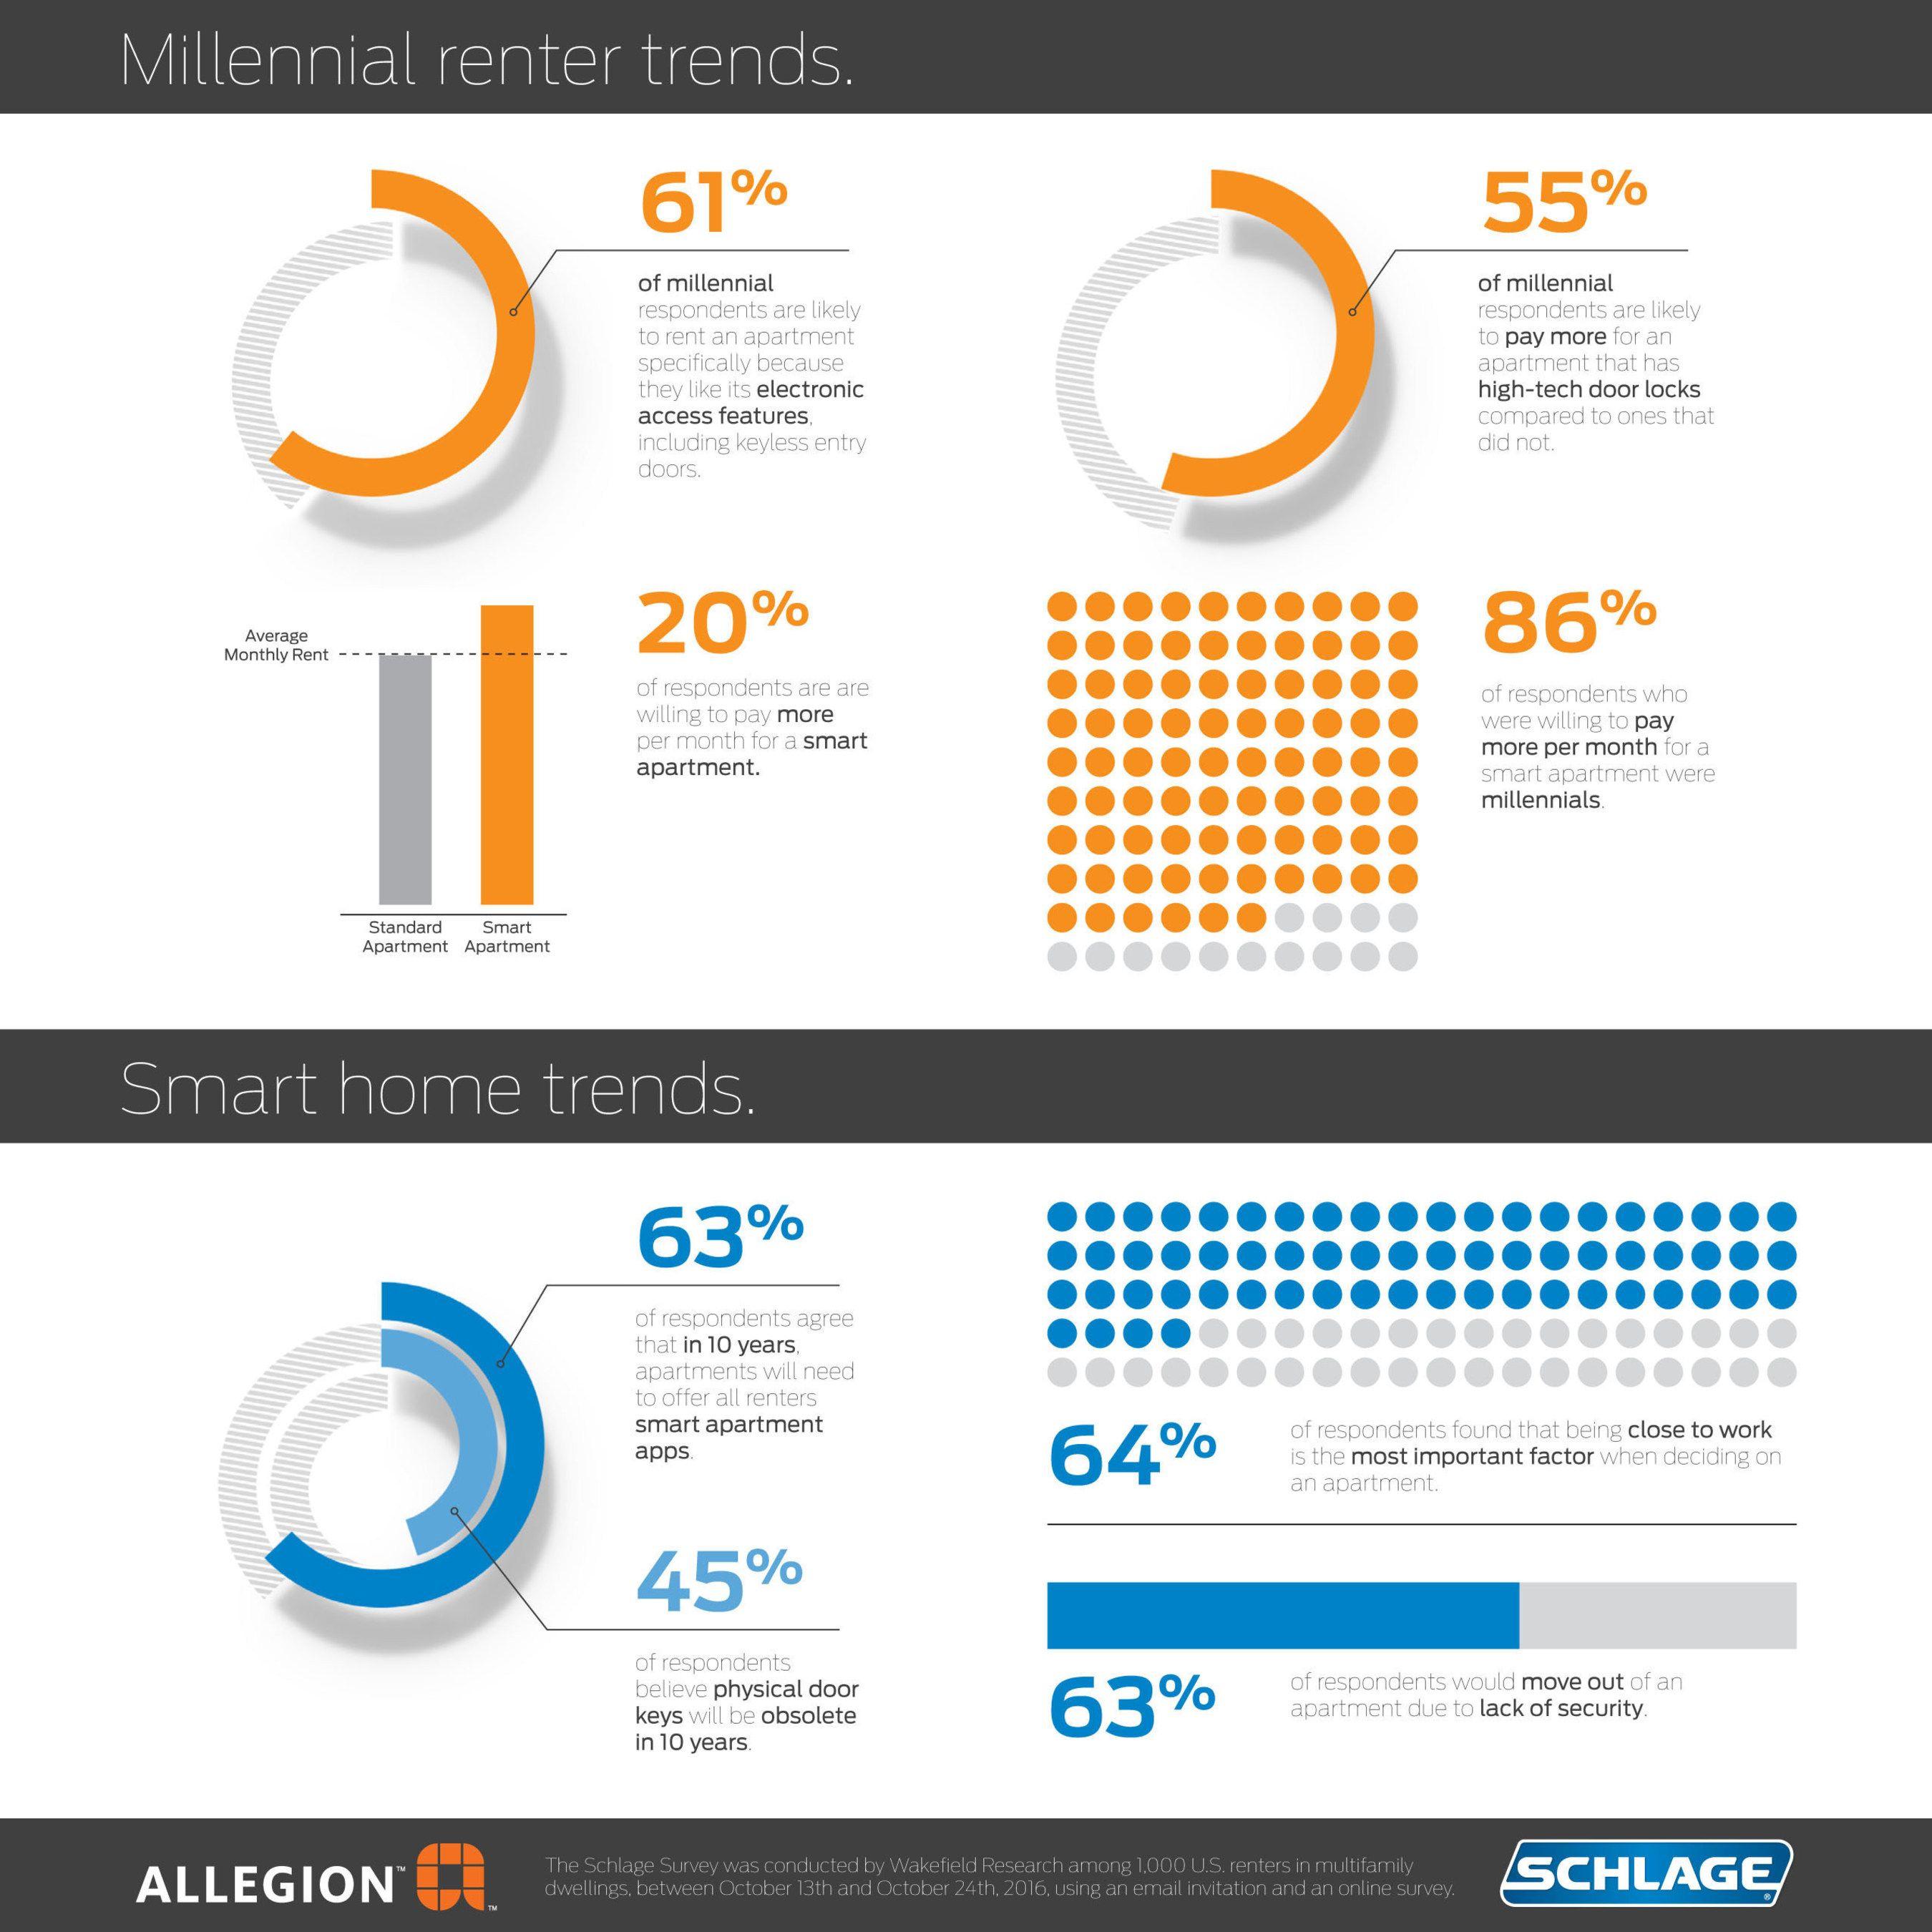 Schlage Logo - Results of Schlage's Industry Insight Survey Reveals What Millennial ...